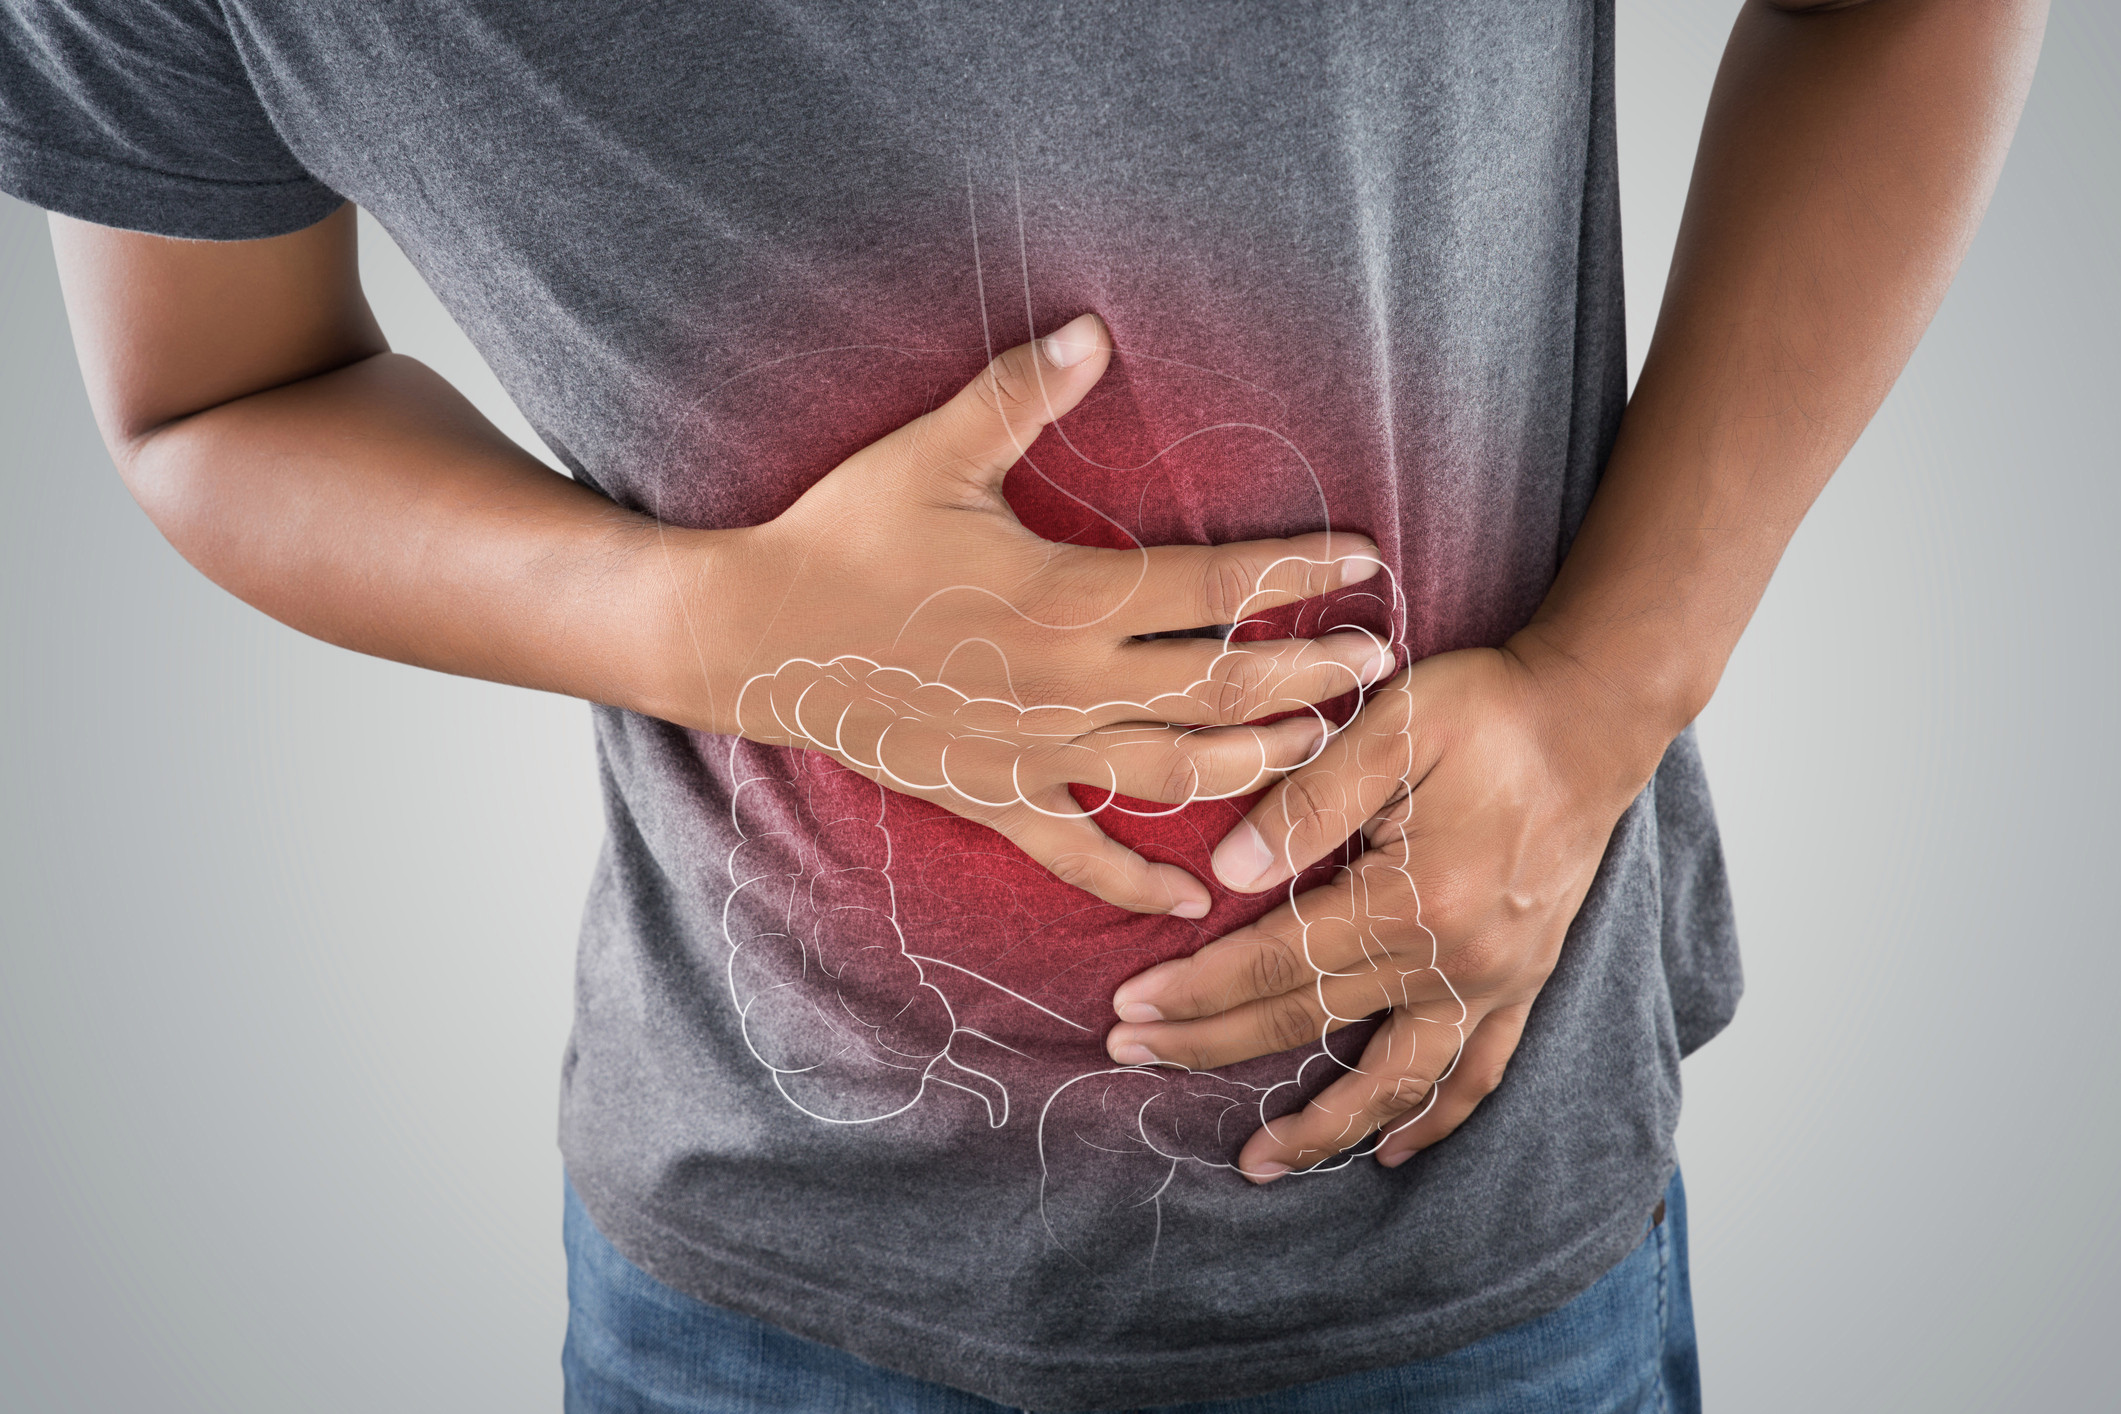 Research indicates that Covid-19 attacks the digestive system